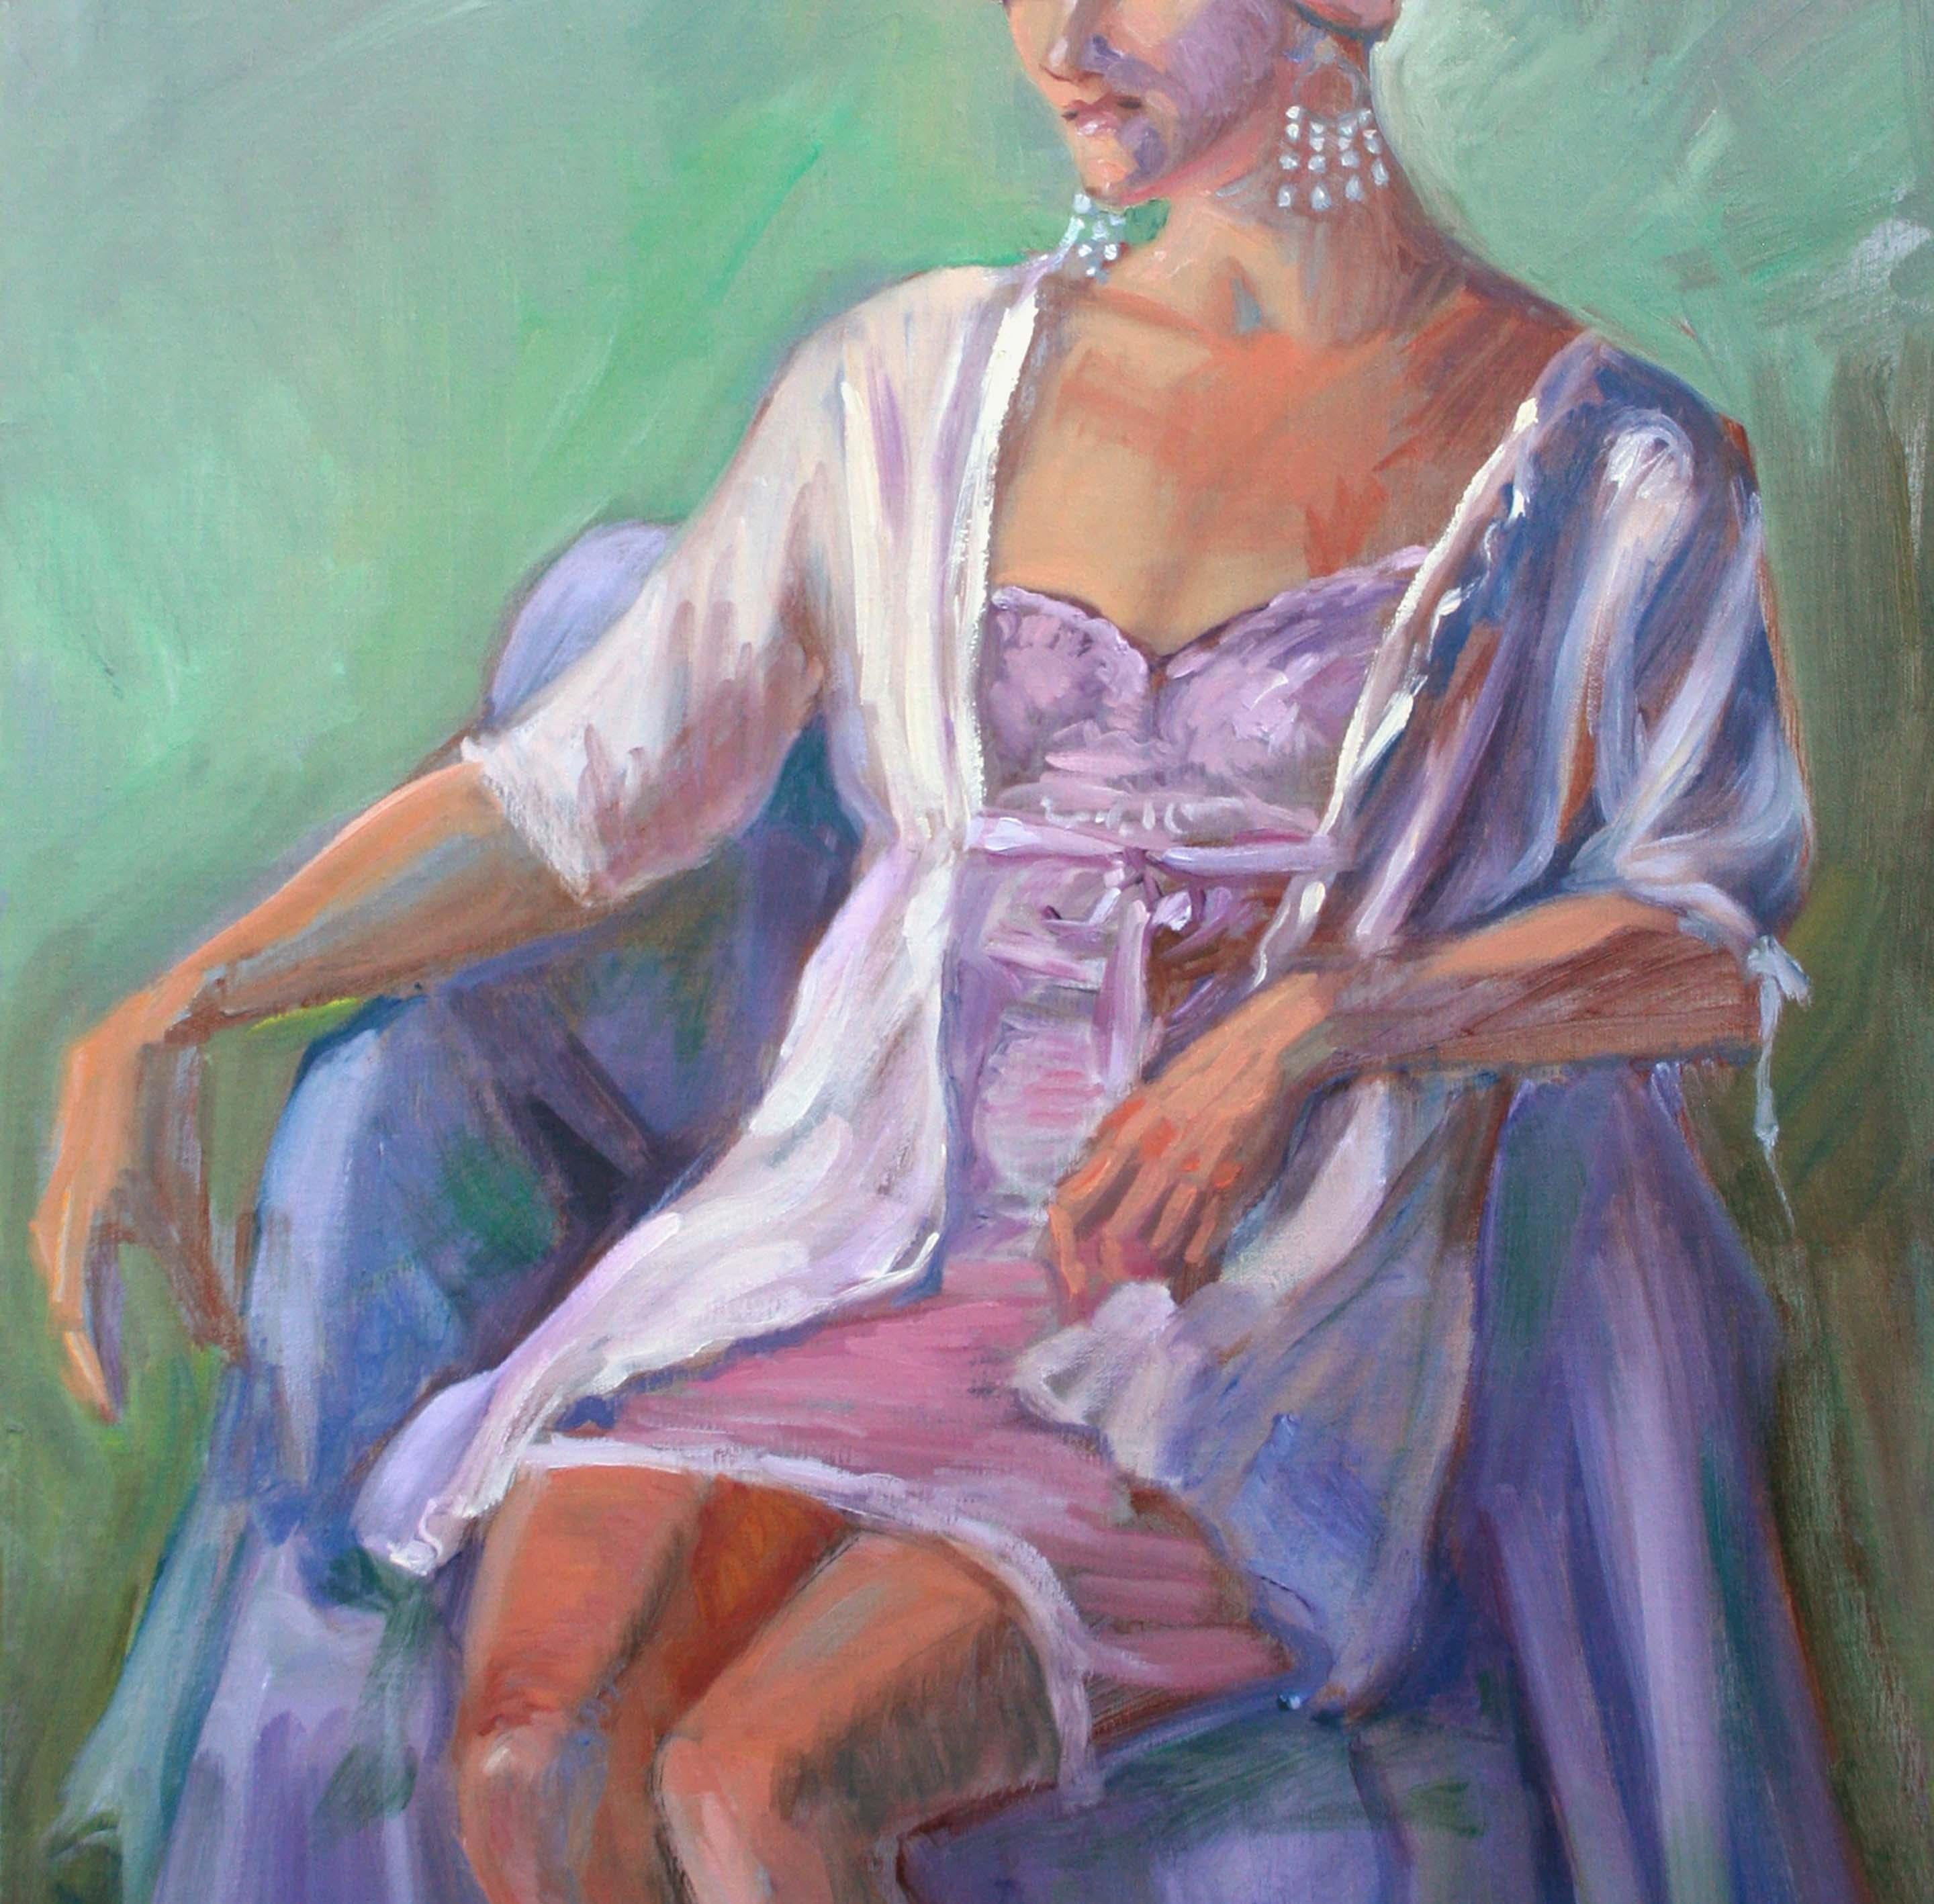 Portrait of a Woman in Purple - Parisian Art Deco Female Figurative

Colorful and quirky art deco style figure painting of a seated Parisian woman dressed in light purple with decorative hat and dangling earrings by listed artist Dominique Amendola